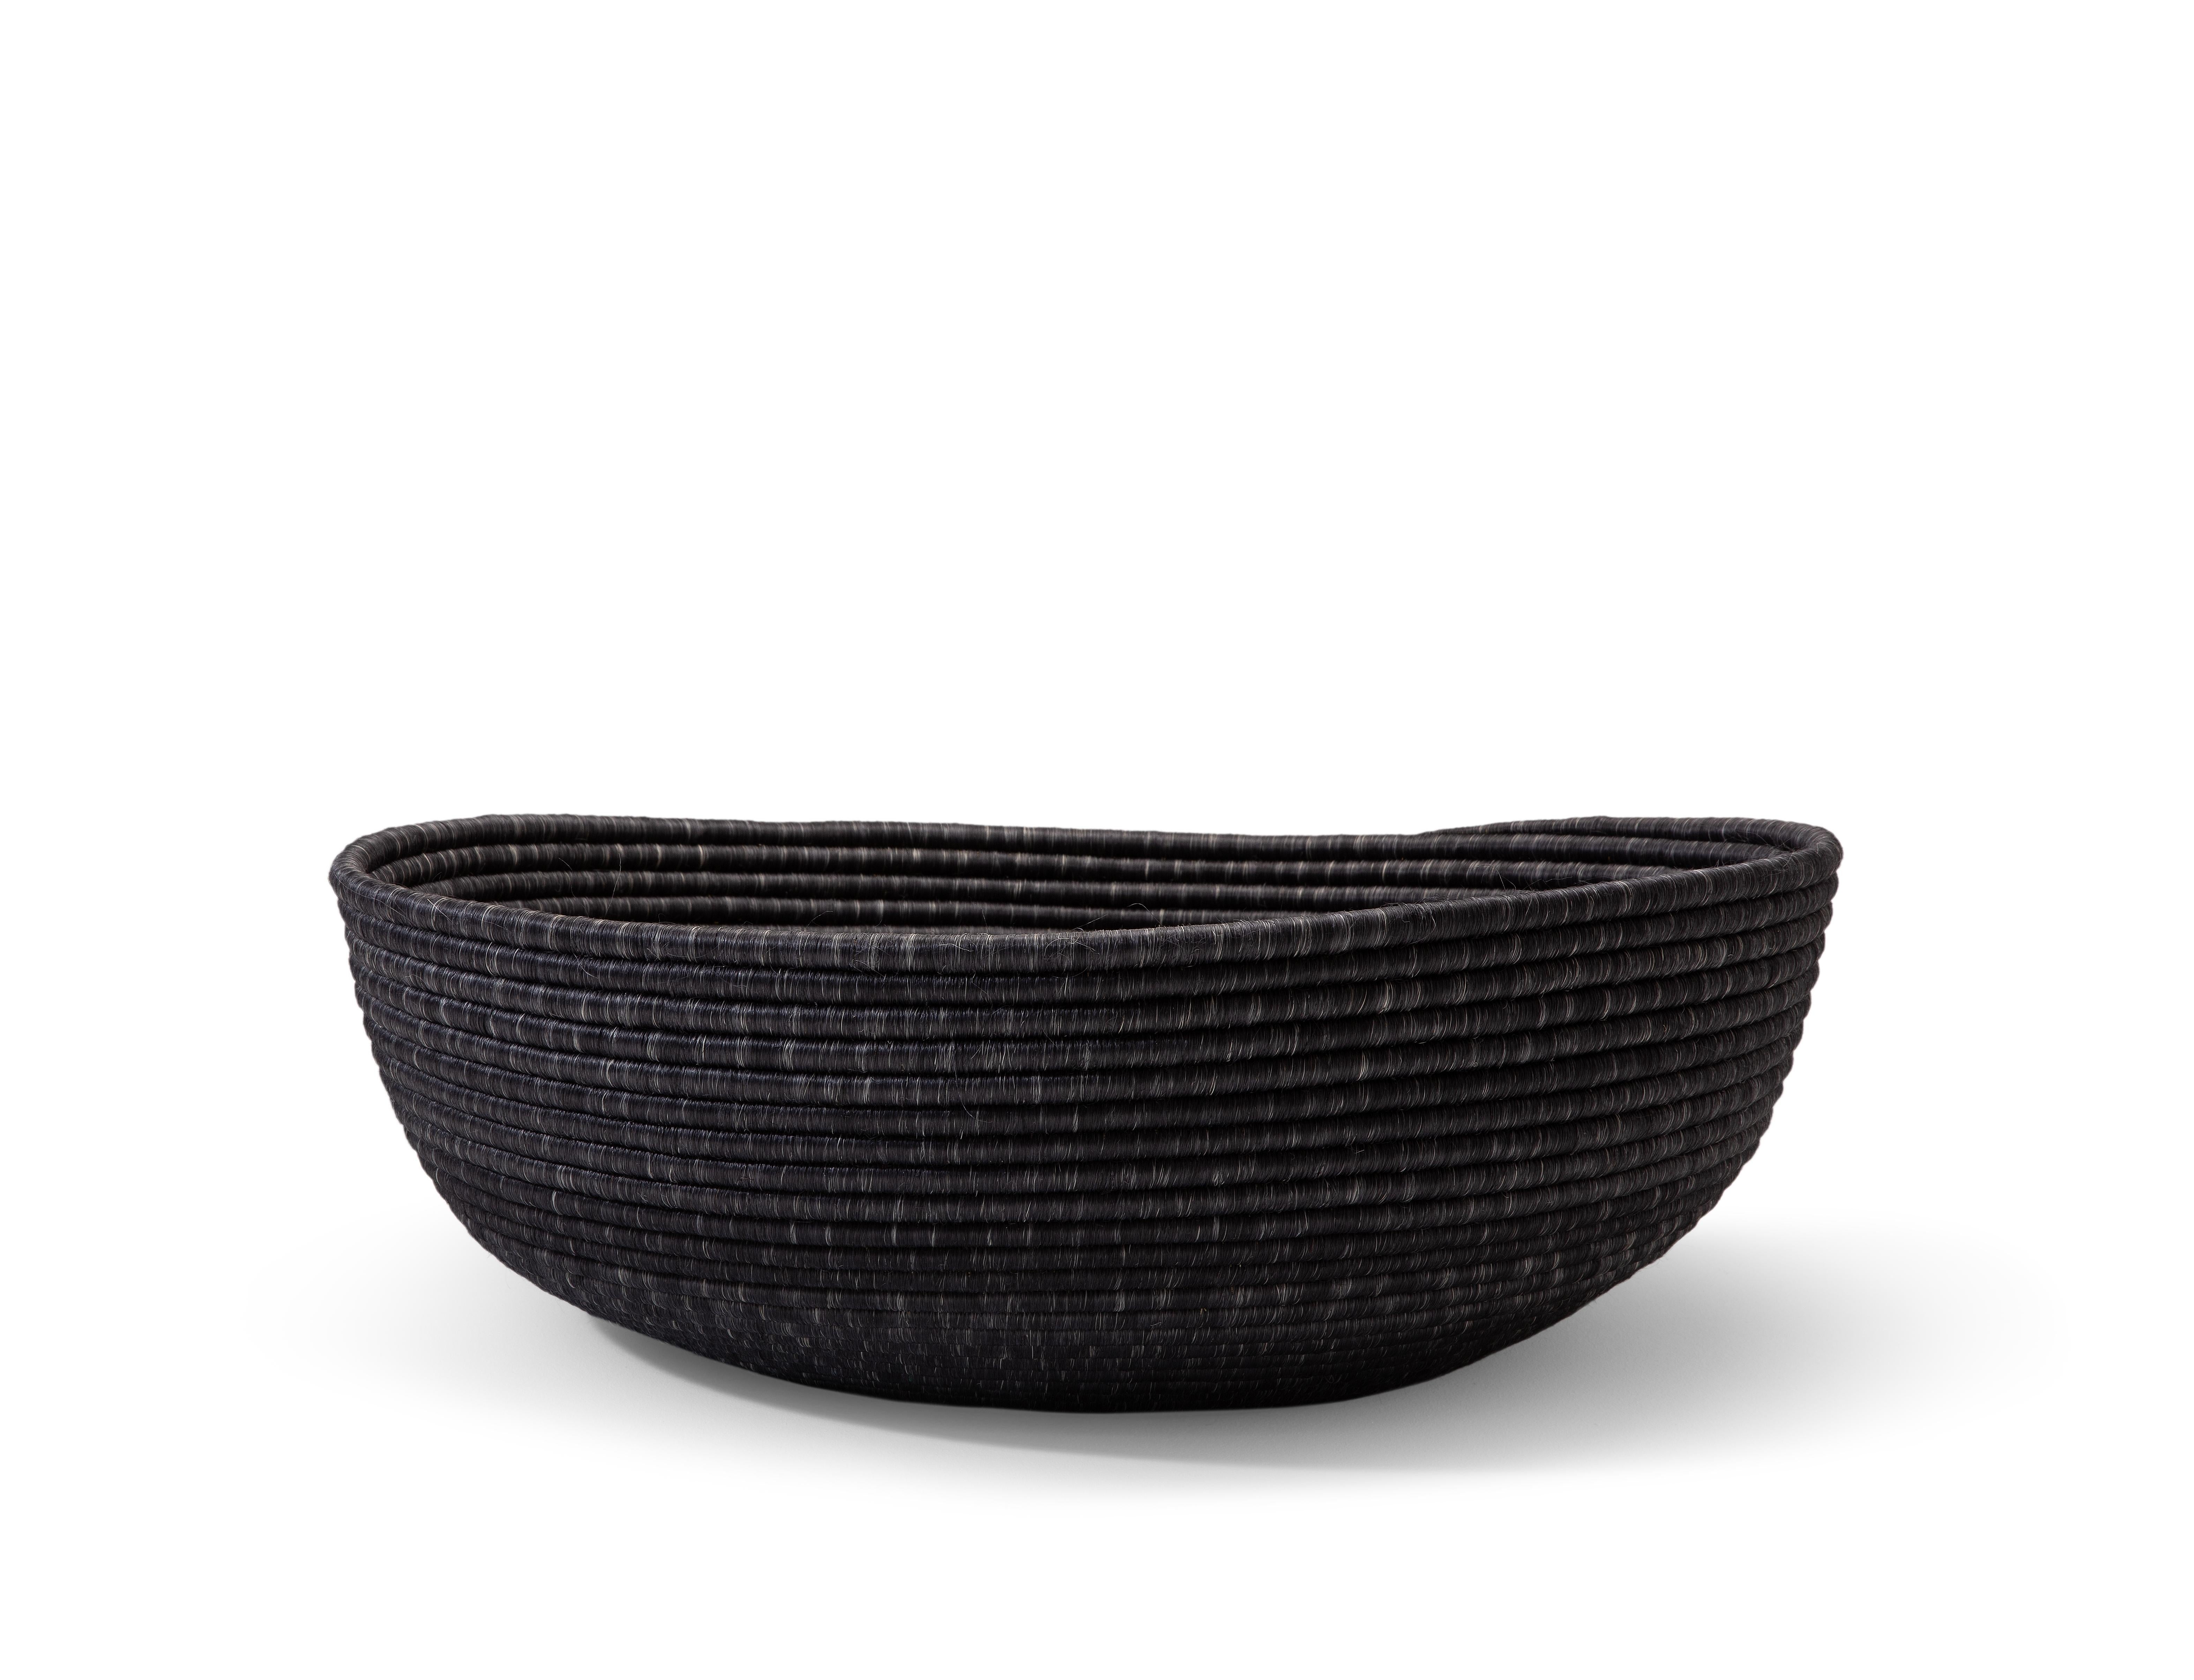 Large la che basket by Sebastian Herkner
Materials: 100 % natural fique agave.
Technique: Hand-woven in Colombia. 
Dimensions: Diameter 78 cm x H 30 cm 
Available in colors: cobre, olive, black, cuerda. And other sizes.
The La Che Basket is